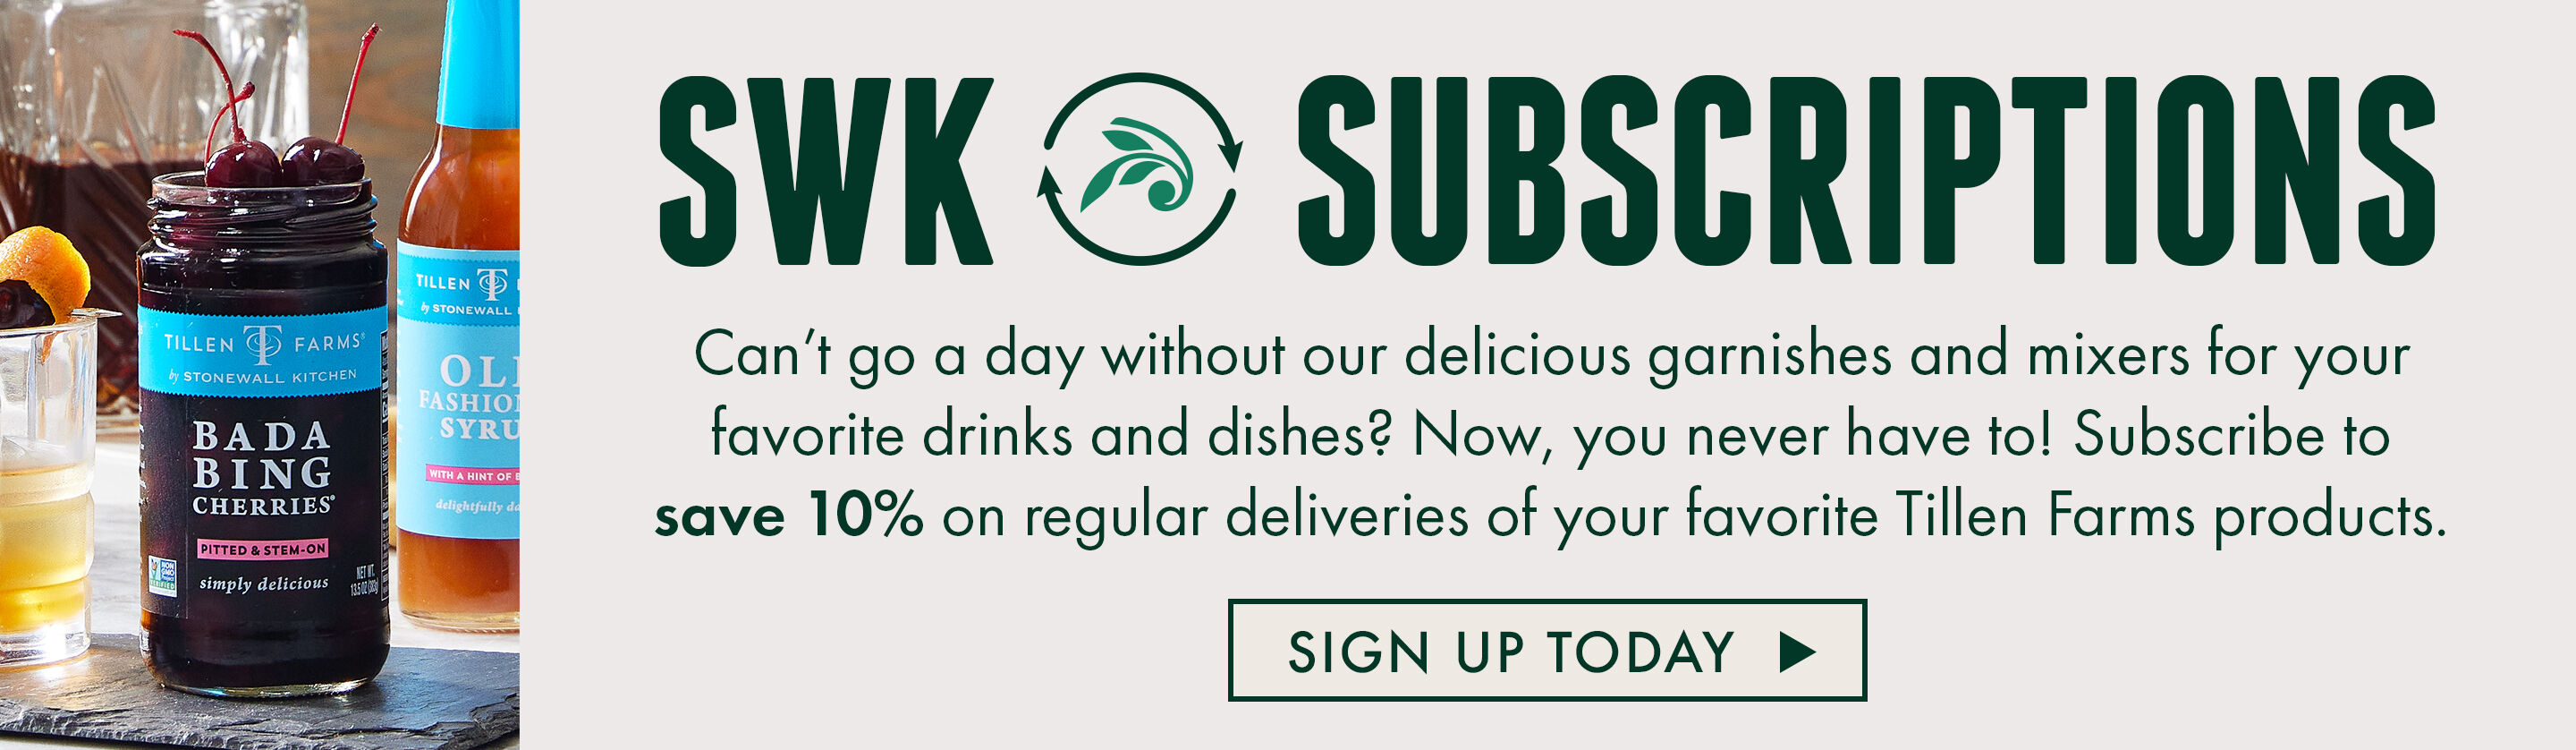 SWK Subscriptions - Sign Up Today